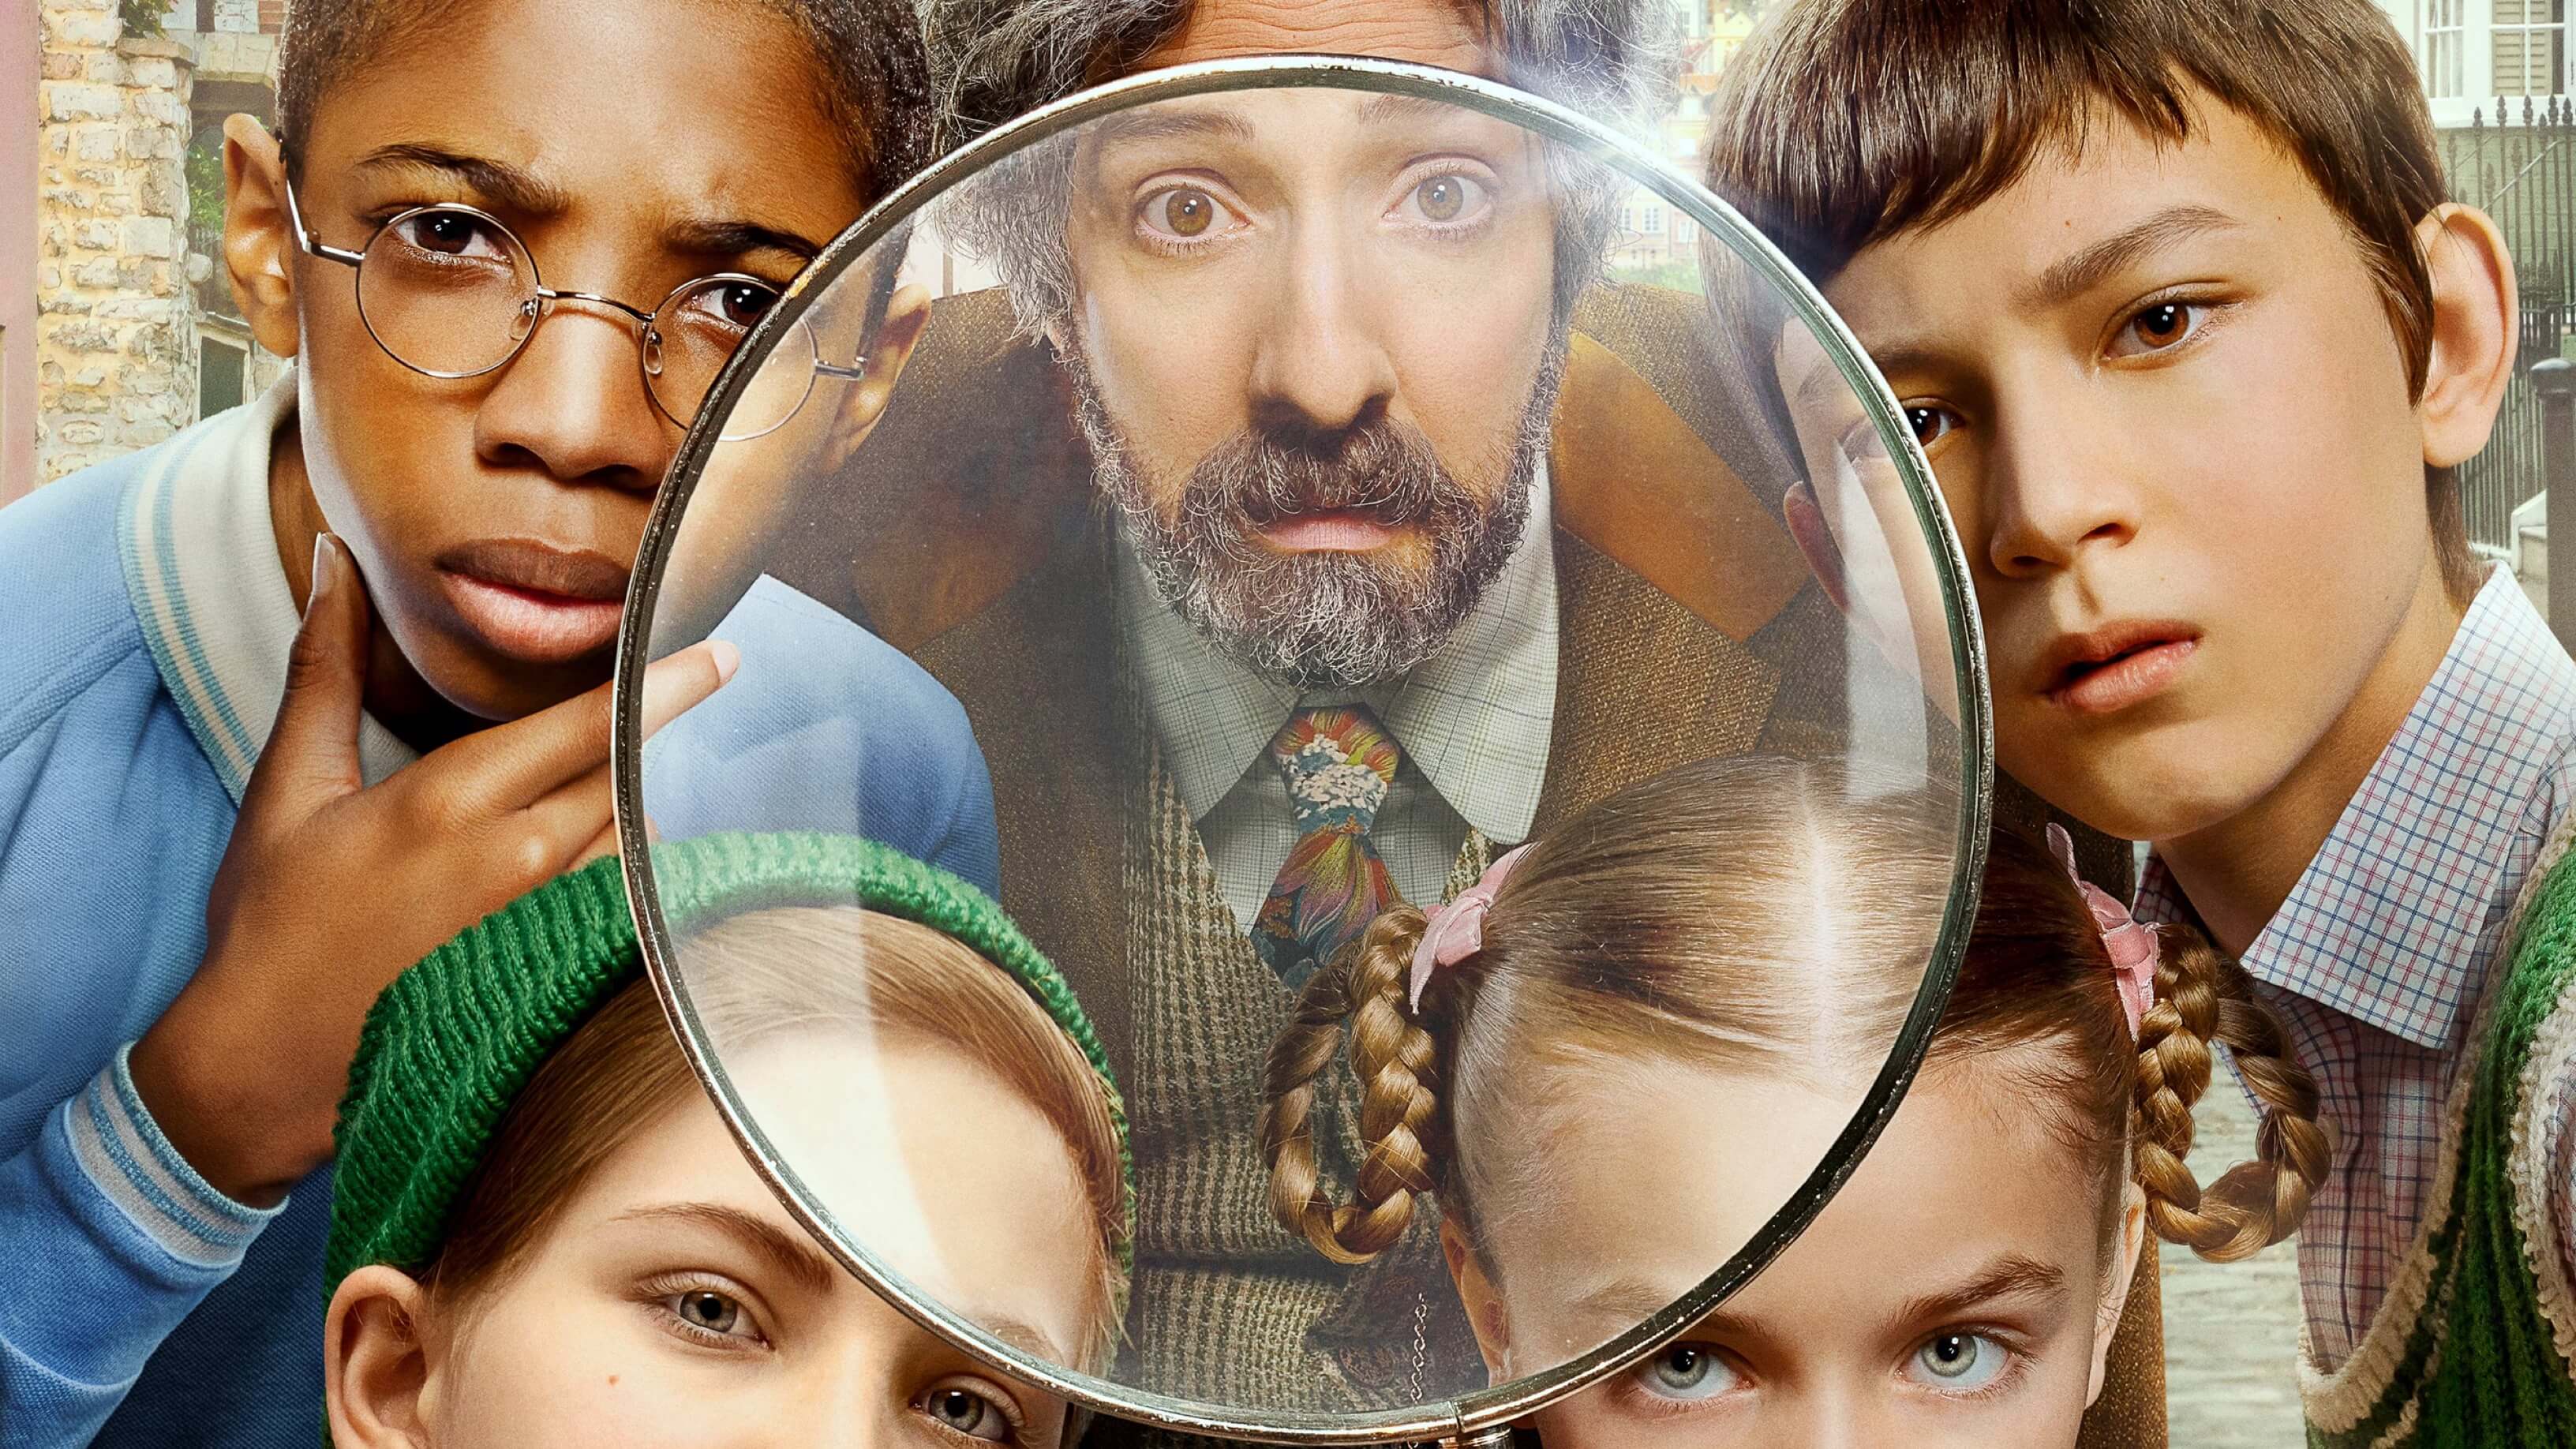 New Trailer and Poster For Disney+ Series ‘The Mysterious Benedict Society’ Debuts